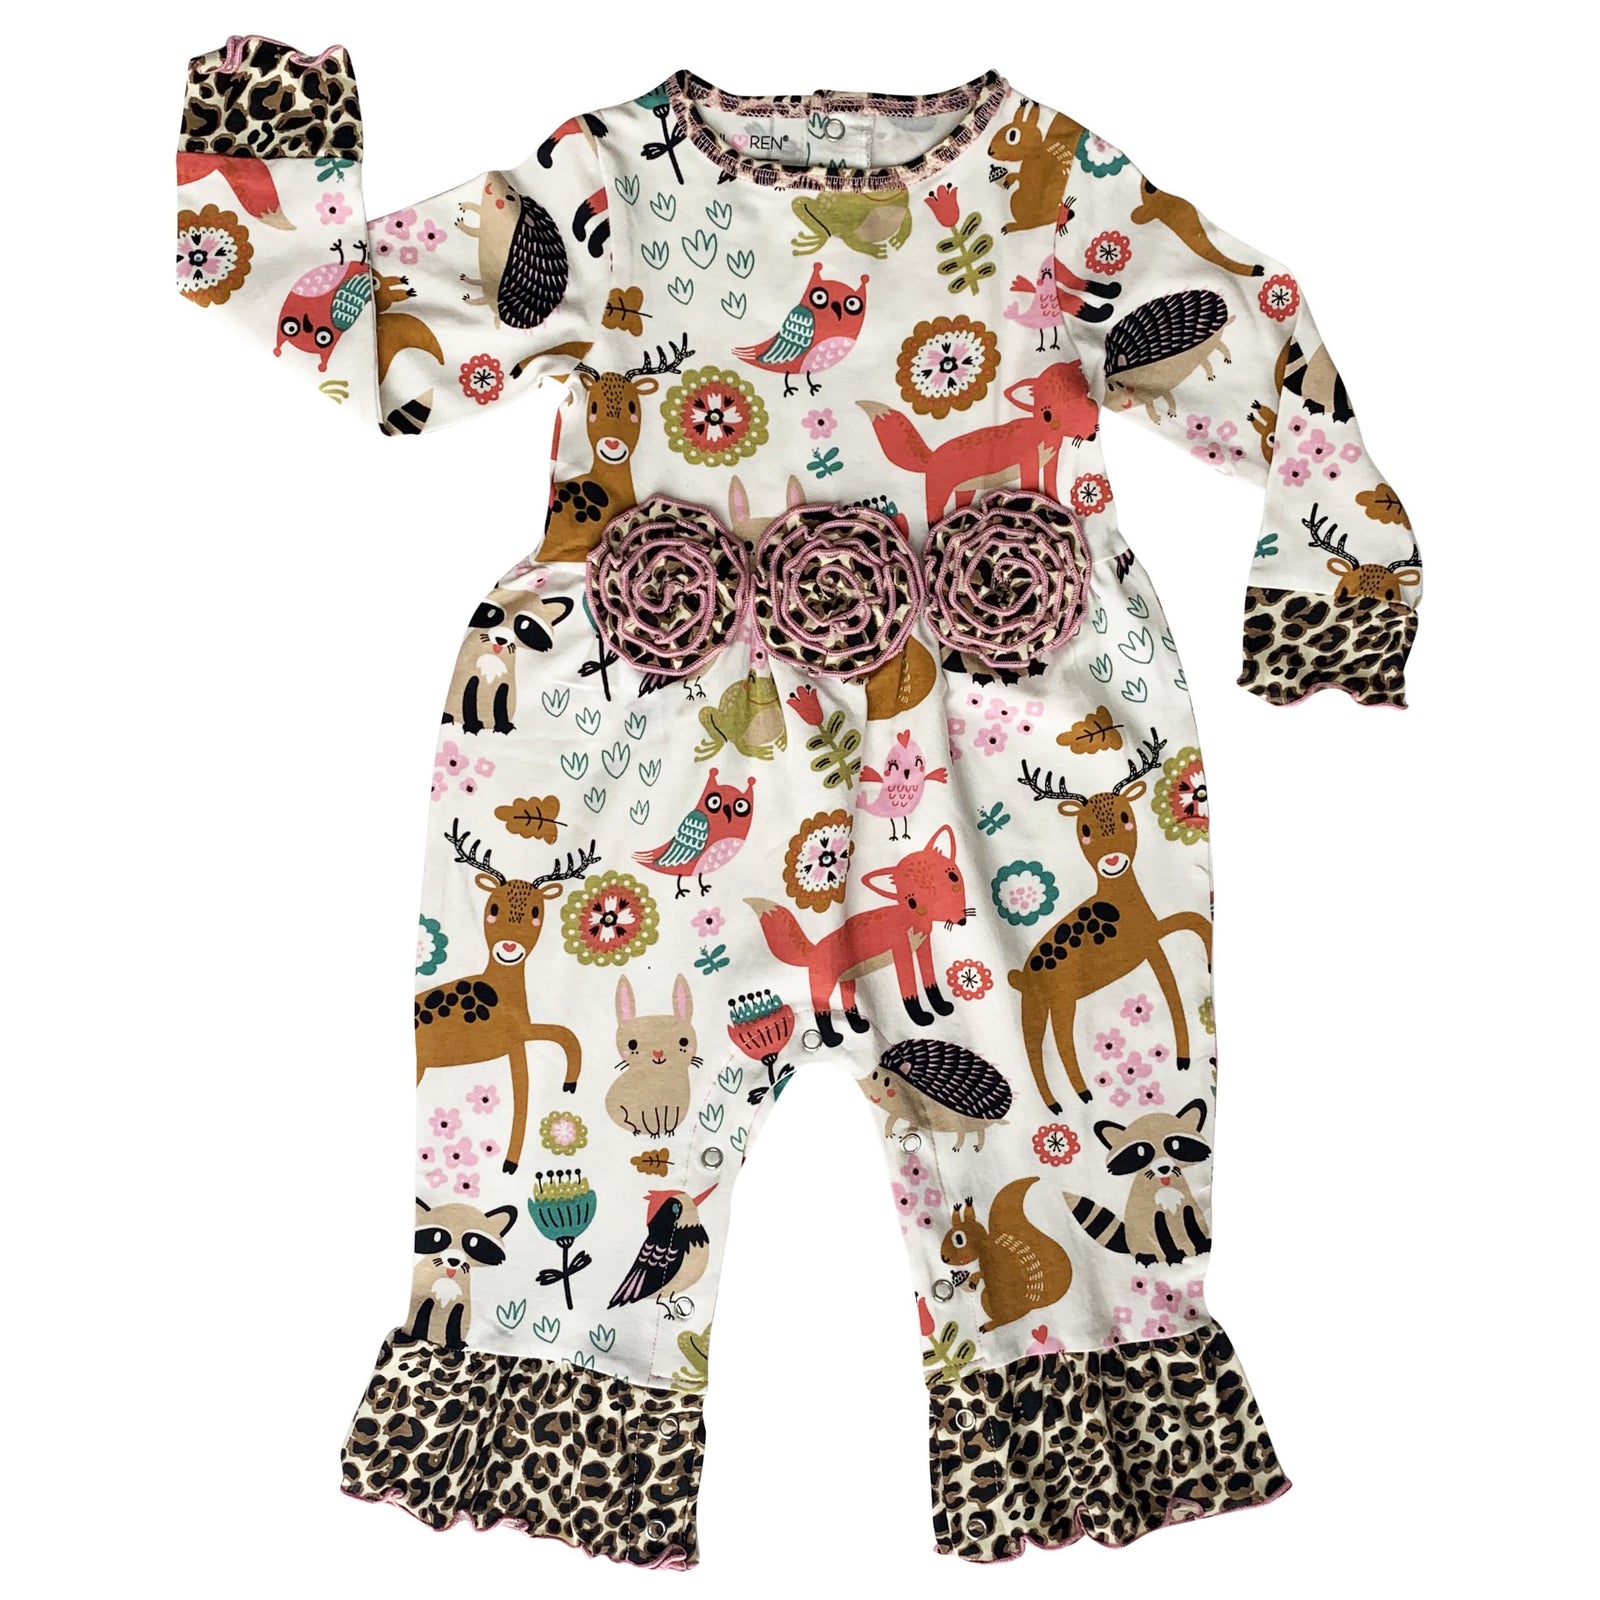 Long Sleeve Forest Animal Friends Baby Toddler Girls Romper Size 6 Mo-24 Mo by AnnLoren